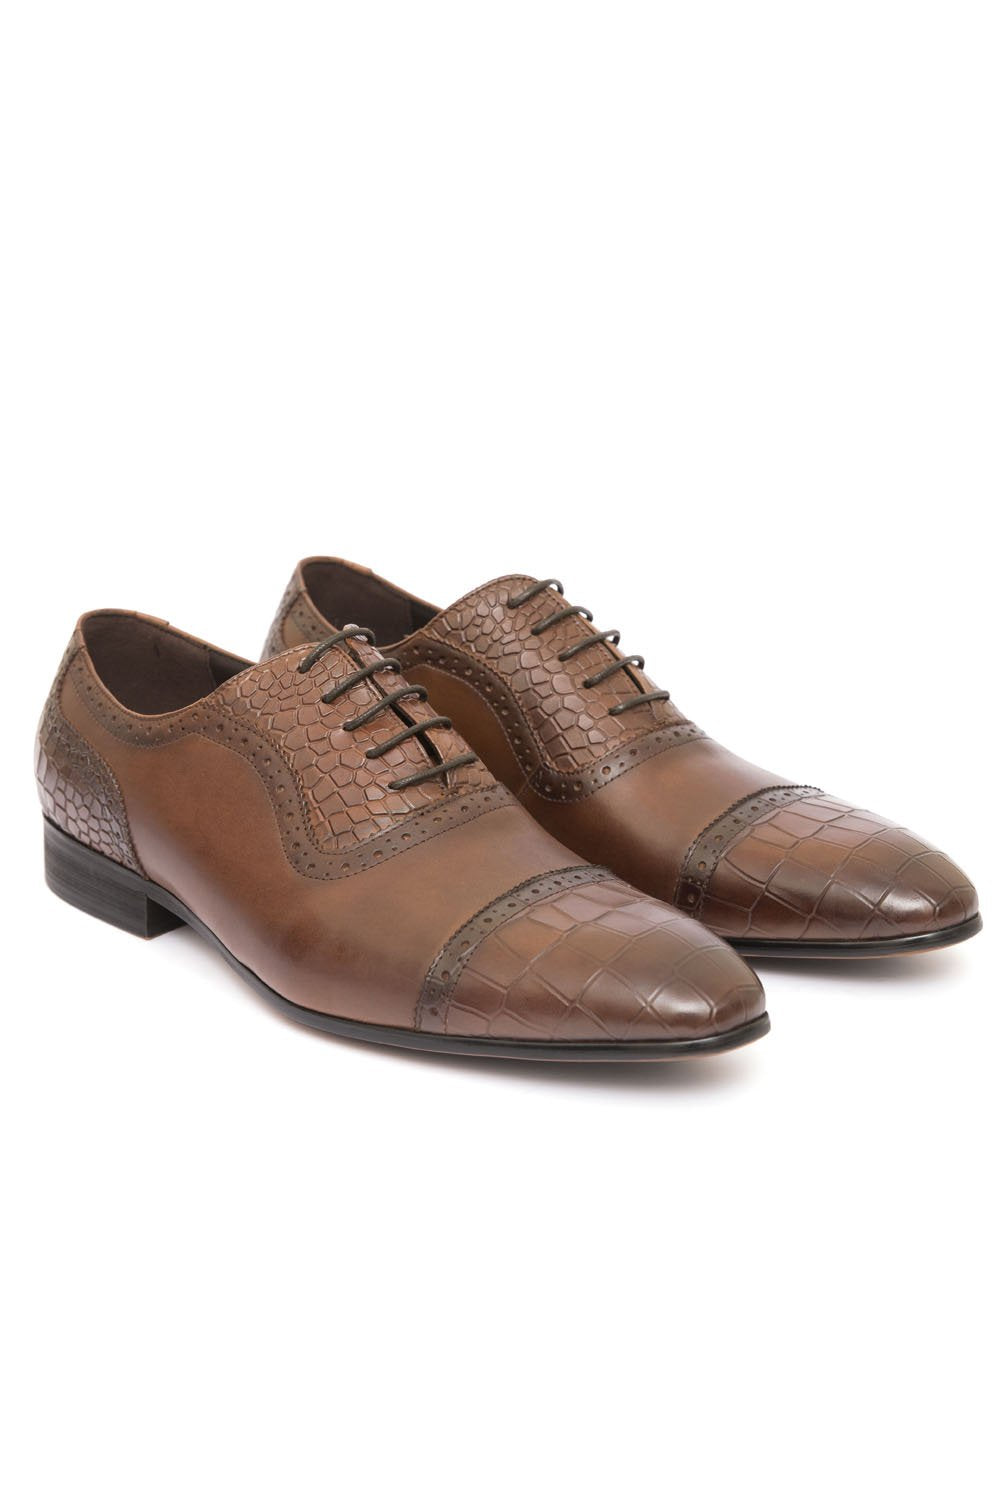 BROWN SMART LEATHER SHOES